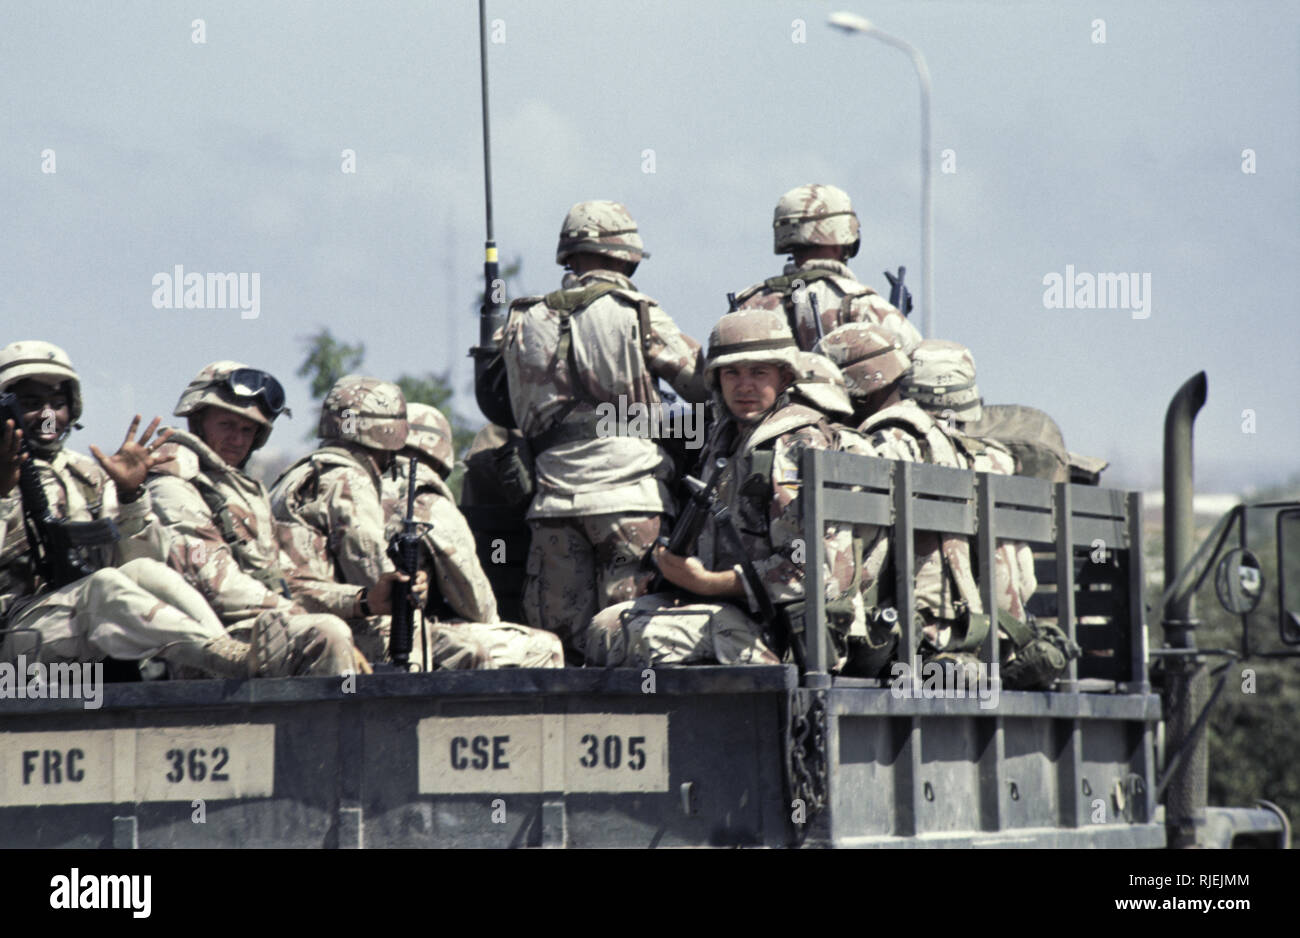 16th October 1993 Leaving UNOSOM Headquarters, U.S. Army infantry soldiers of C Company 1/87 head out onto the streets of Mogadishu, Somalia in the back of an M35 truck. Stock Photo